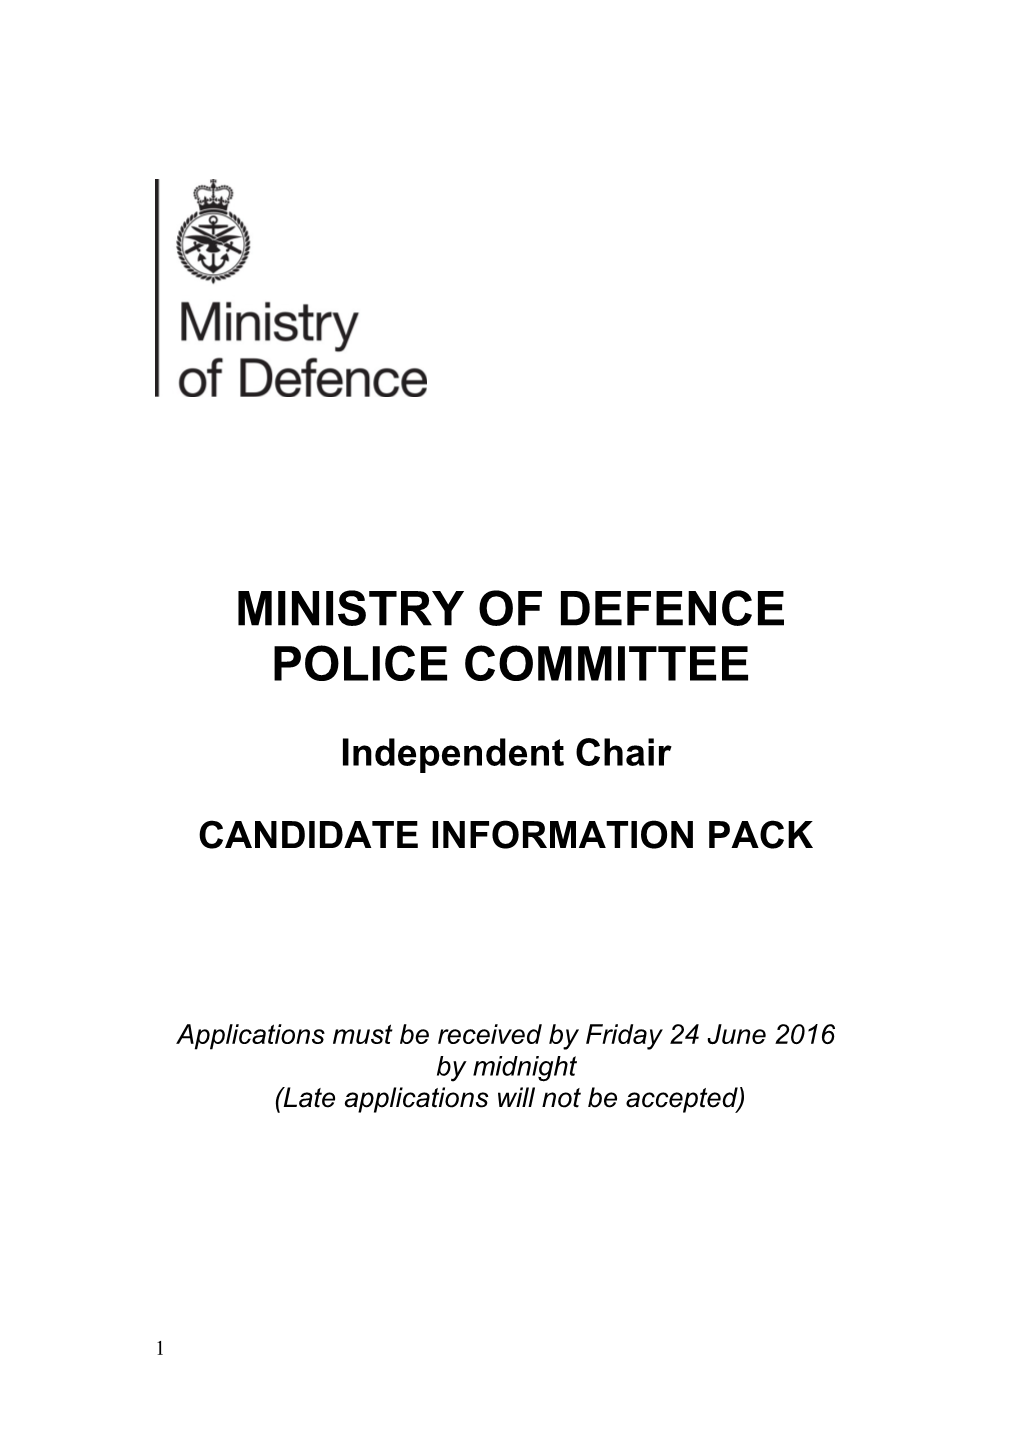 20160416-Chair of the Mod Police Committee-Information Pack